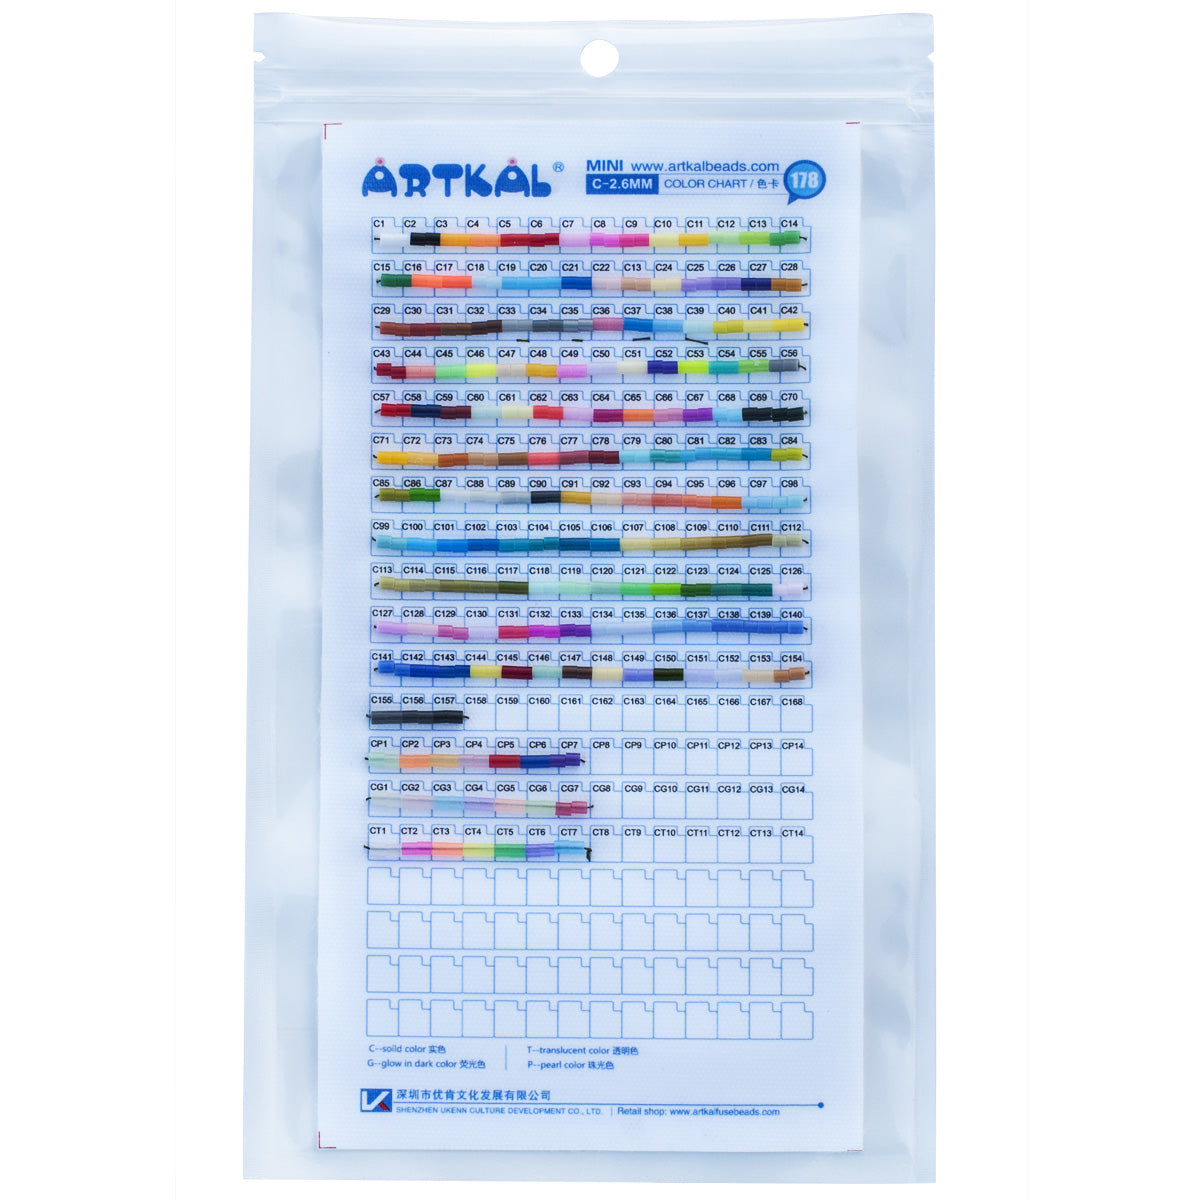 NEW-Artkal Beads Physical Color Chart